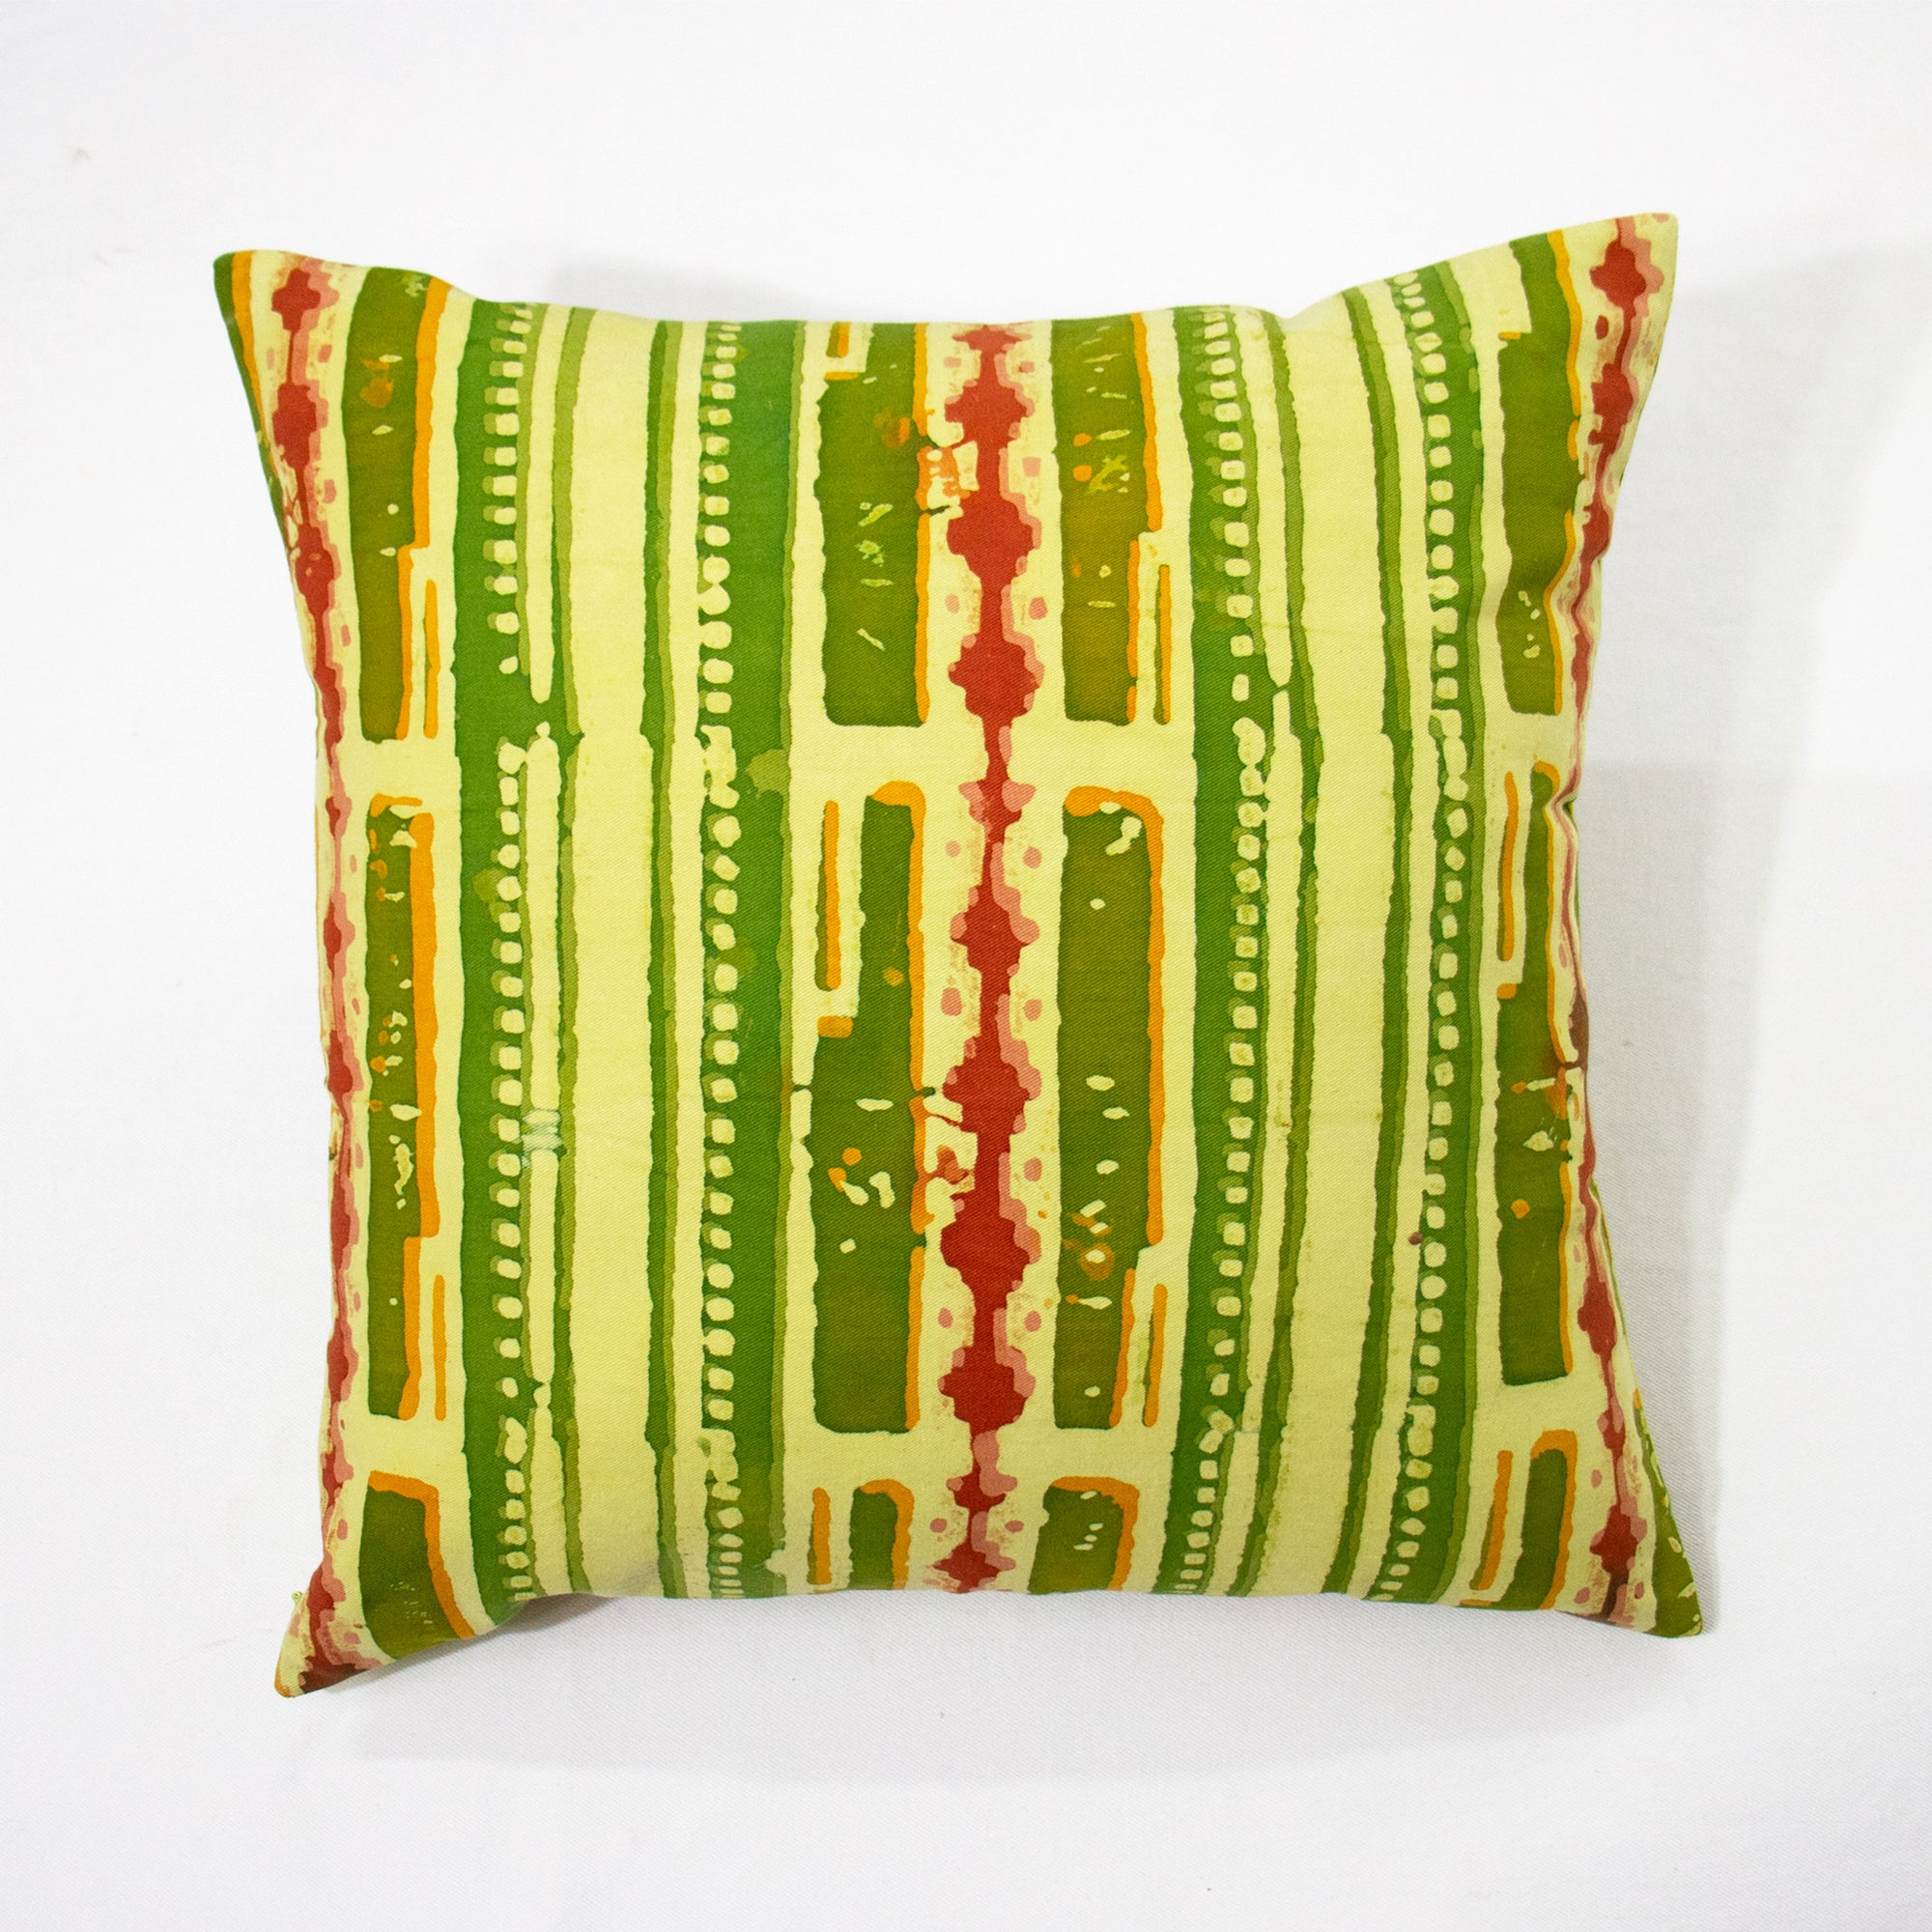 Hand Painted Accent Pillow Cover - Encoded